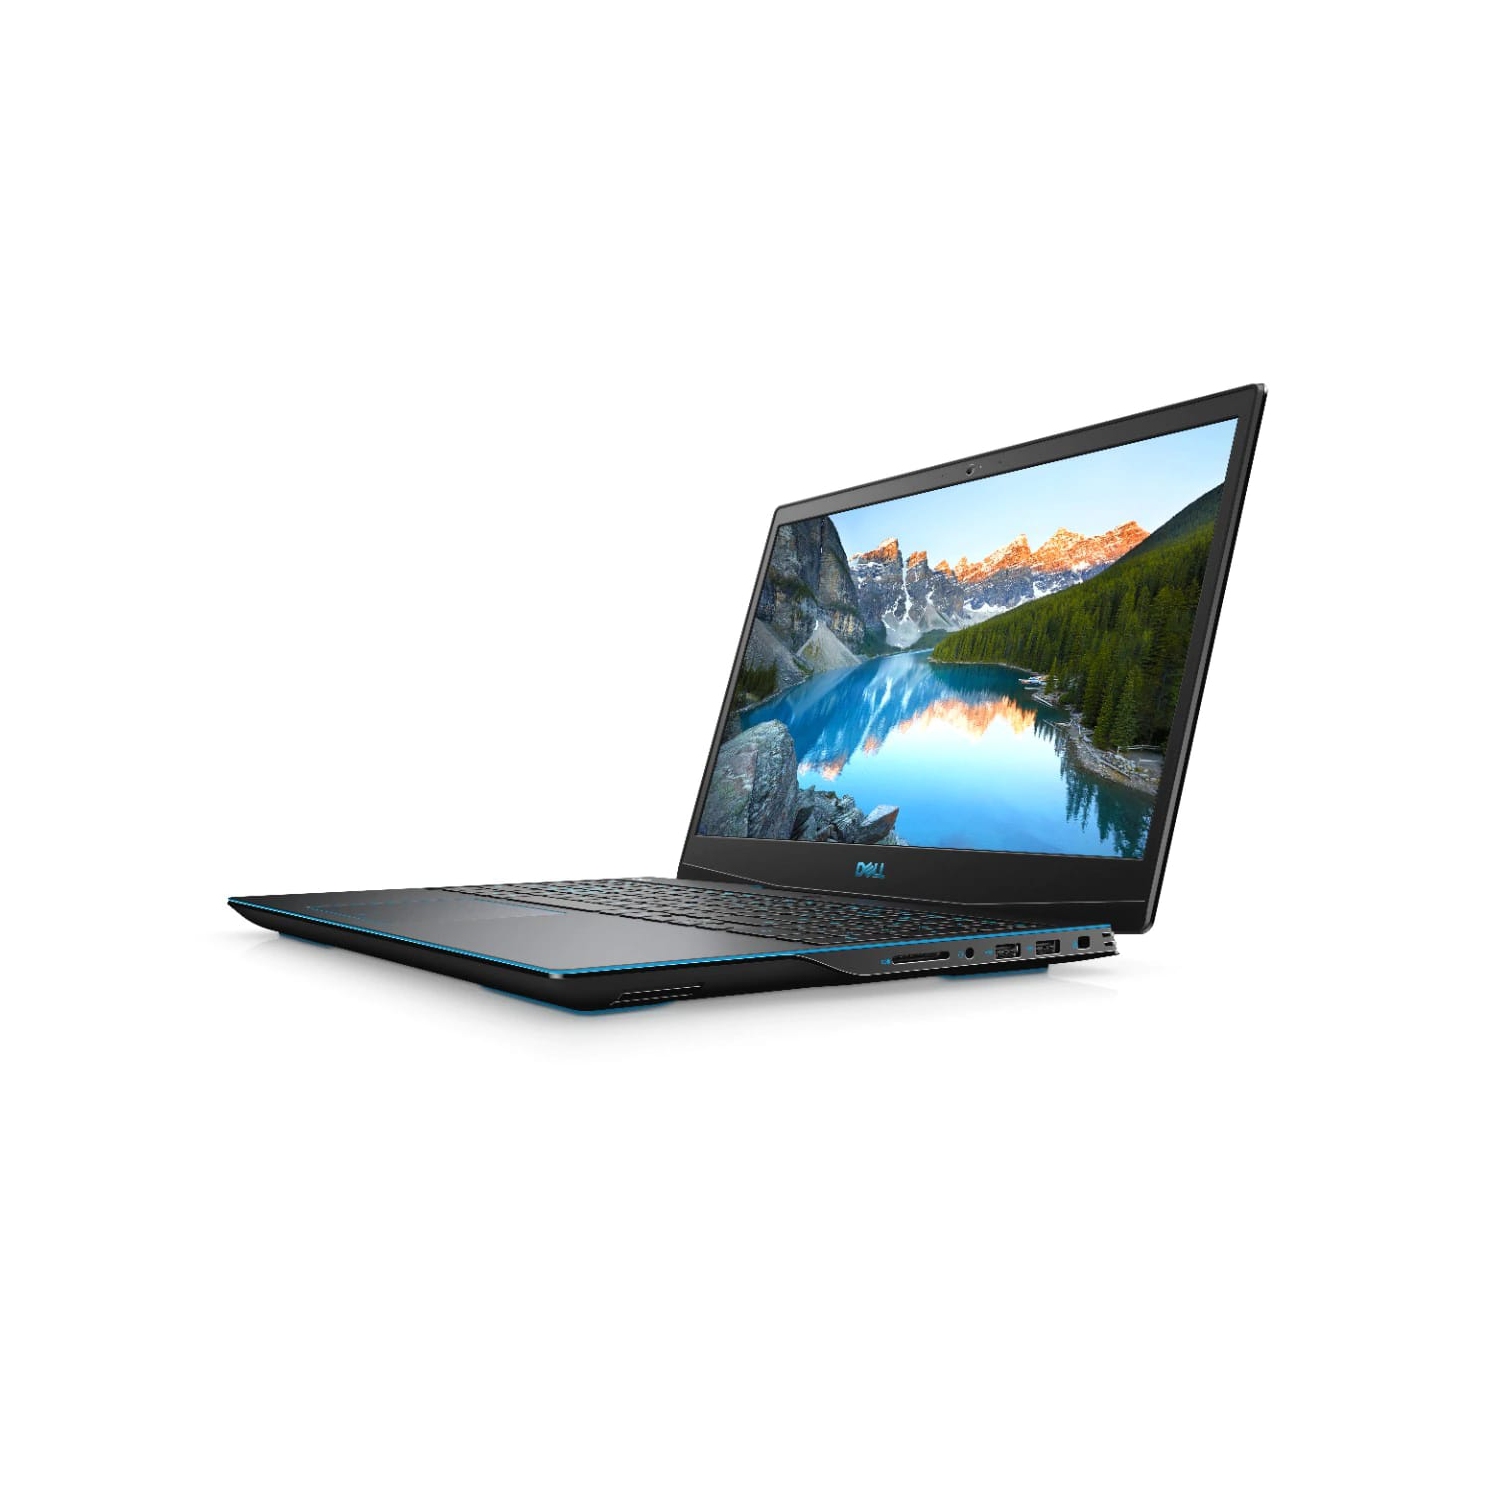 Refurbished (Excellent) - Dell G3 15 3500 Gaming Laptop (2020), 15.6" FHD, Core i7 - 512GB SSD - 16GB RAM - 1660 Ti, 6 Cores @ 5 GHz - 10th Gen CPU Certified Refurbished